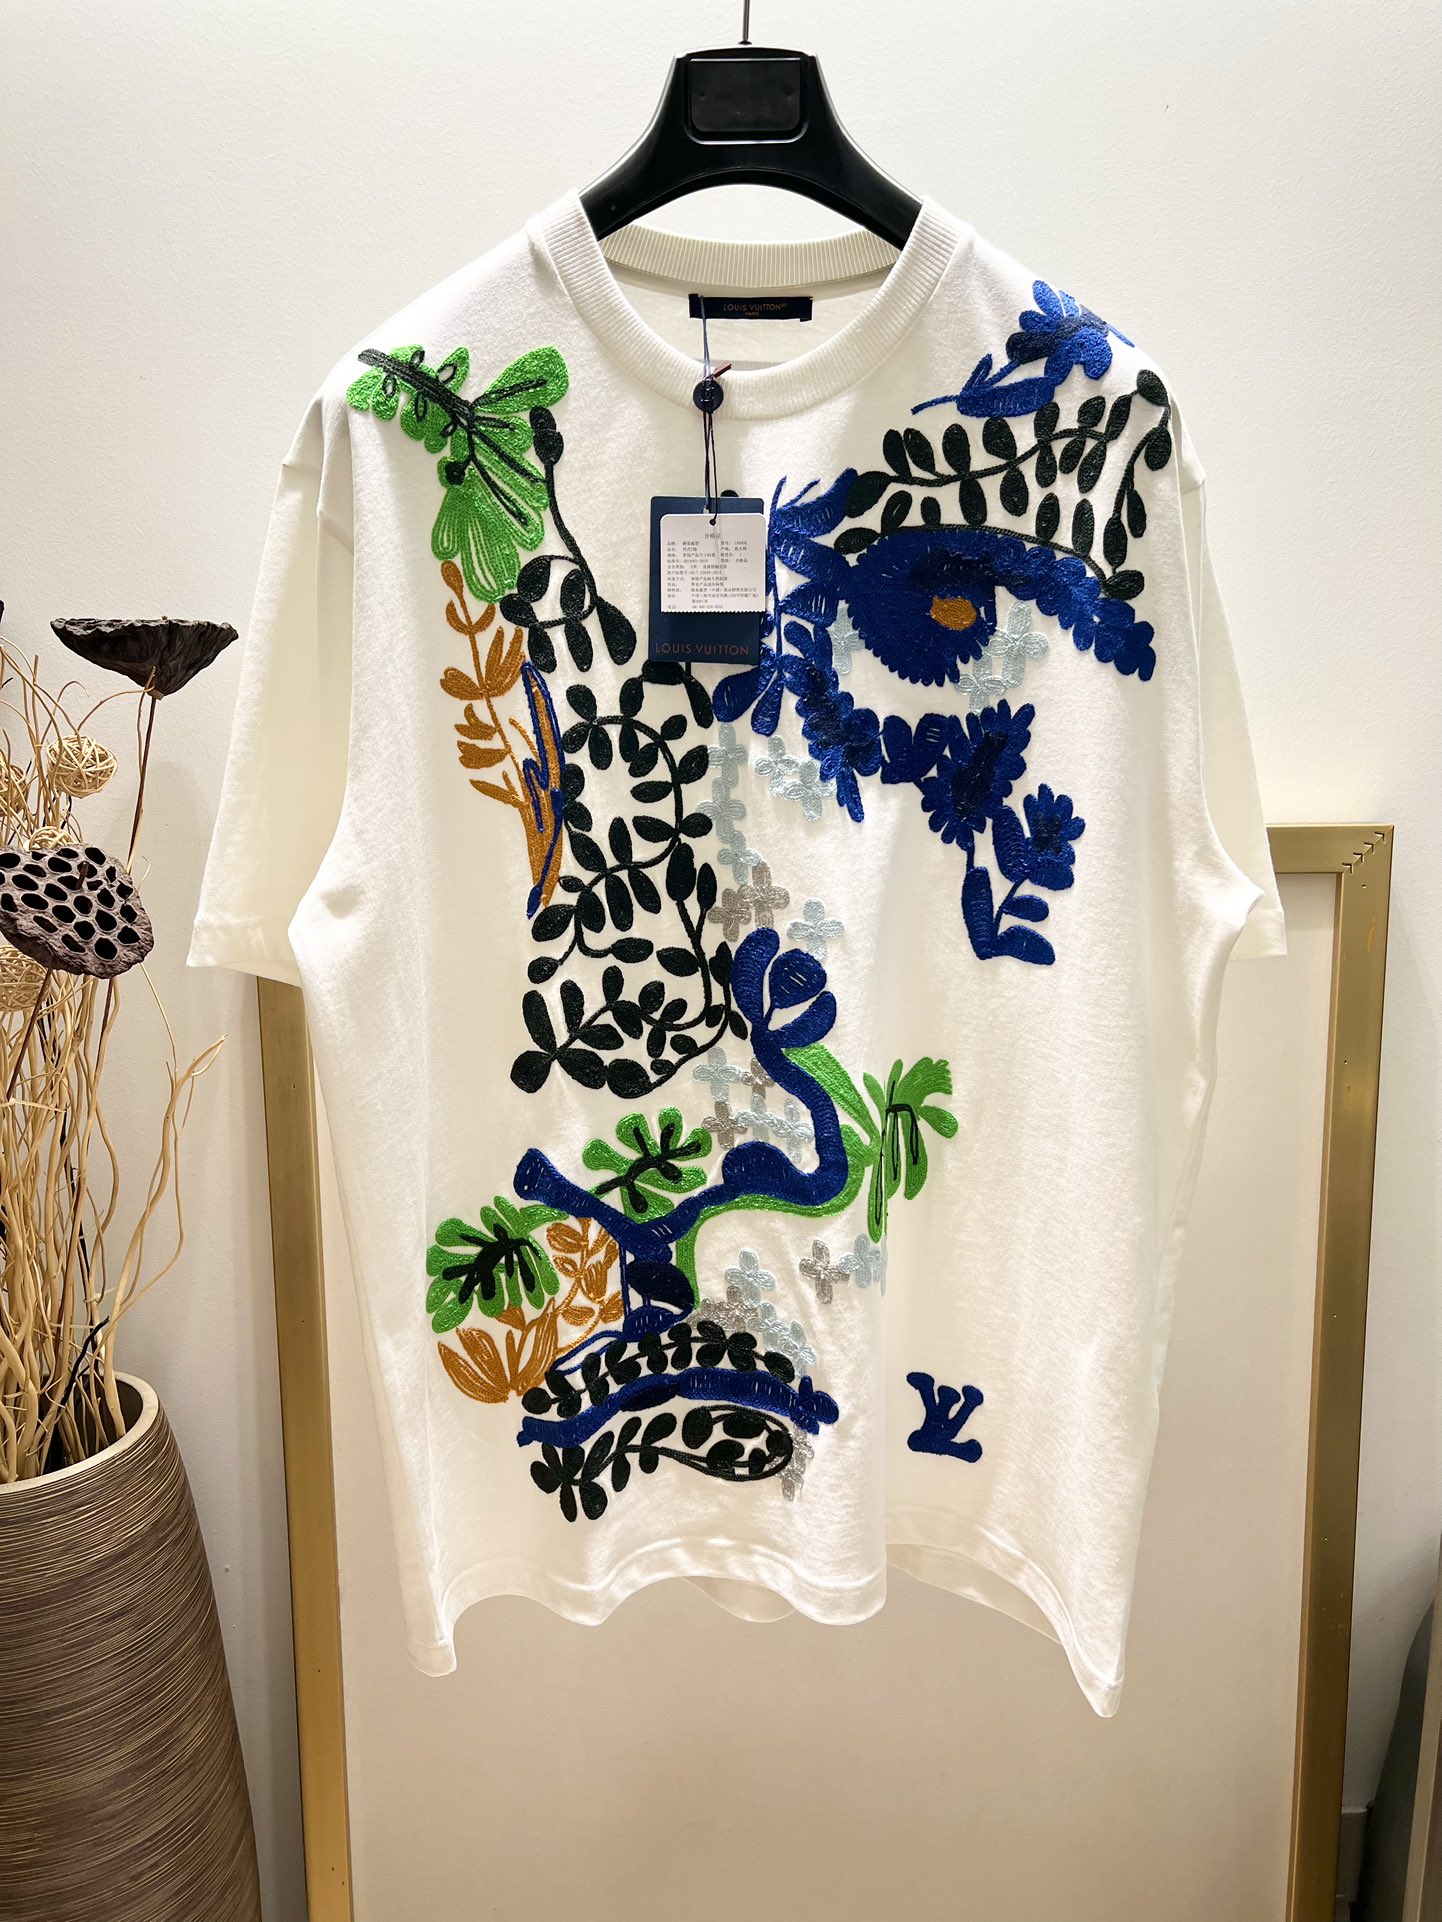 Louis Vuitton Clothing T-Shirt White Embroidery Unisex Cotton Fall/Winter Collection Fashion